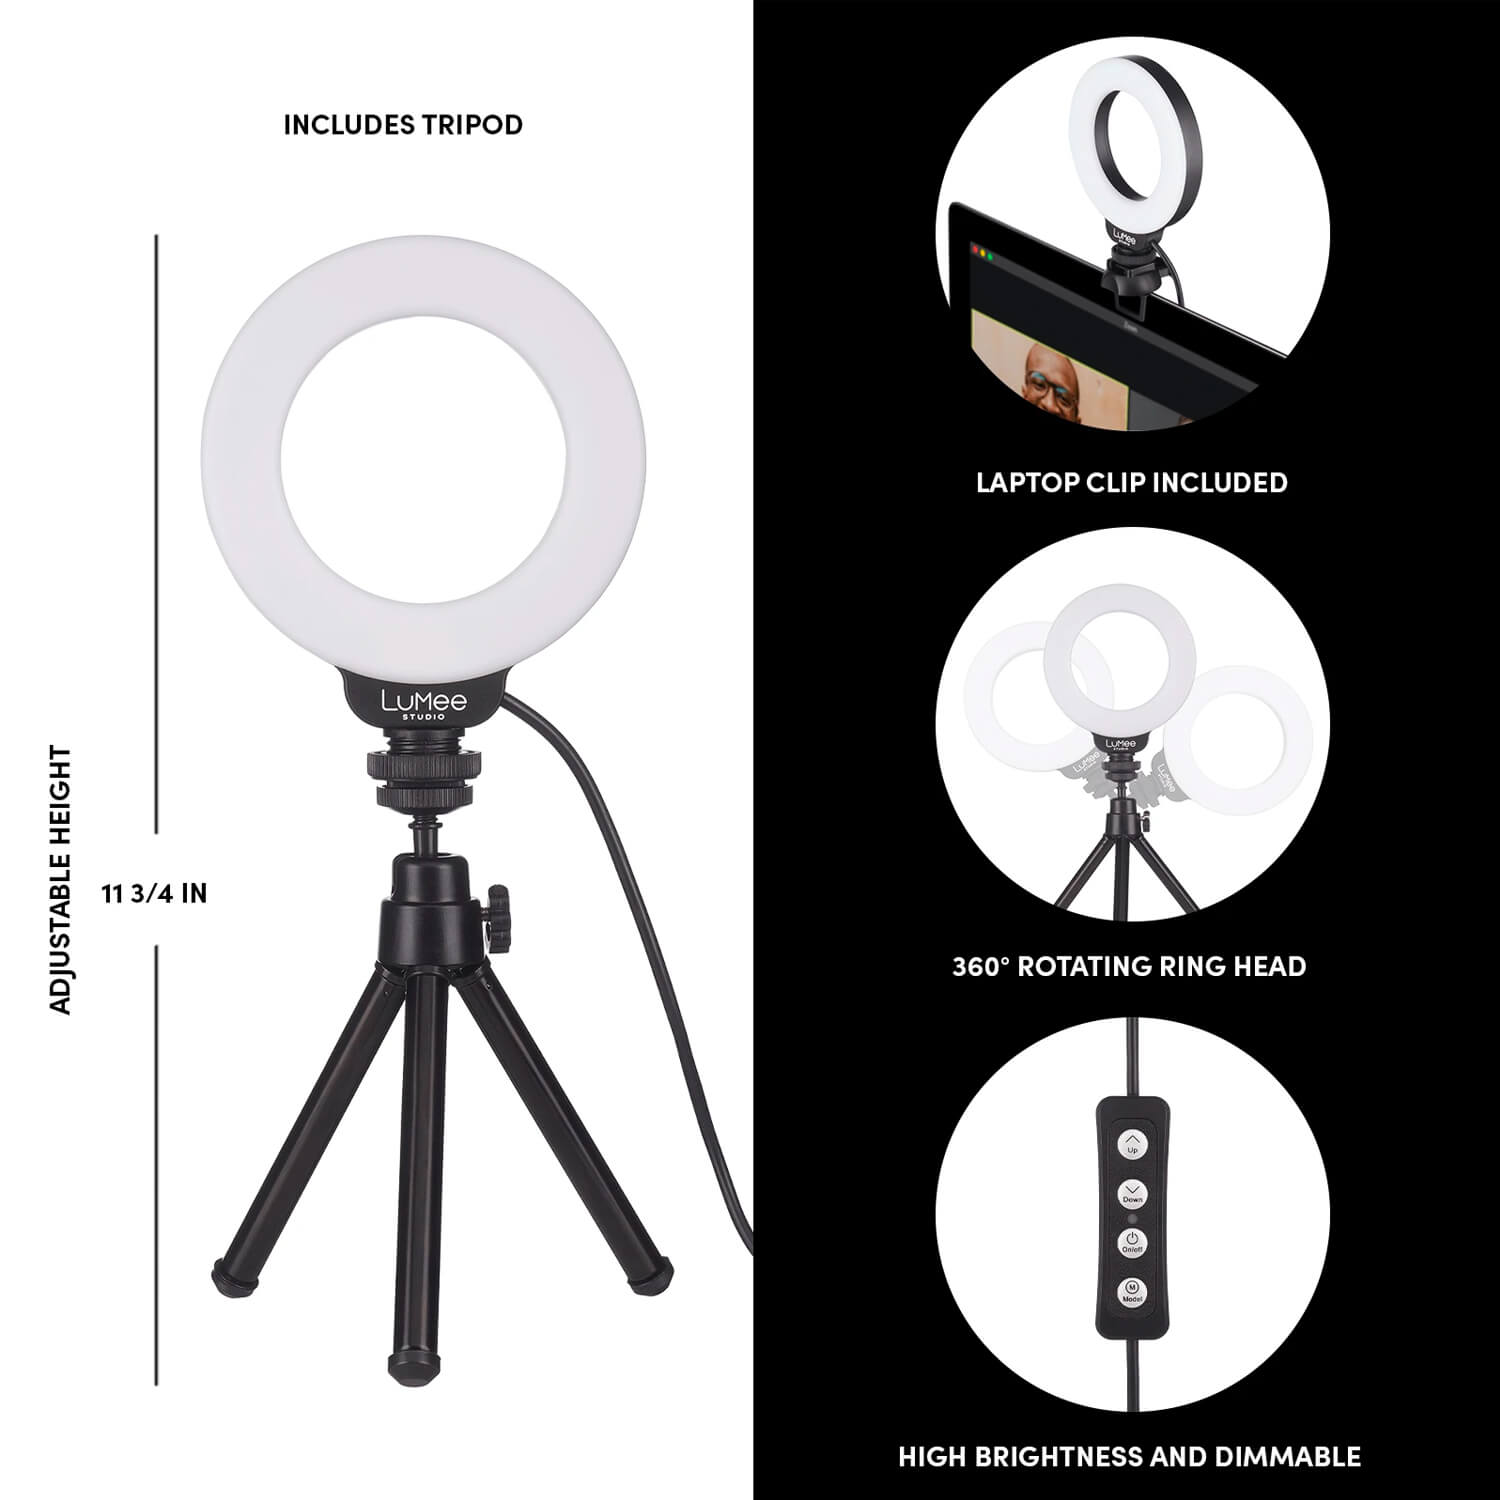 Case-Mate LuMee Studio 4” Ring Light with TriPod Stand Black